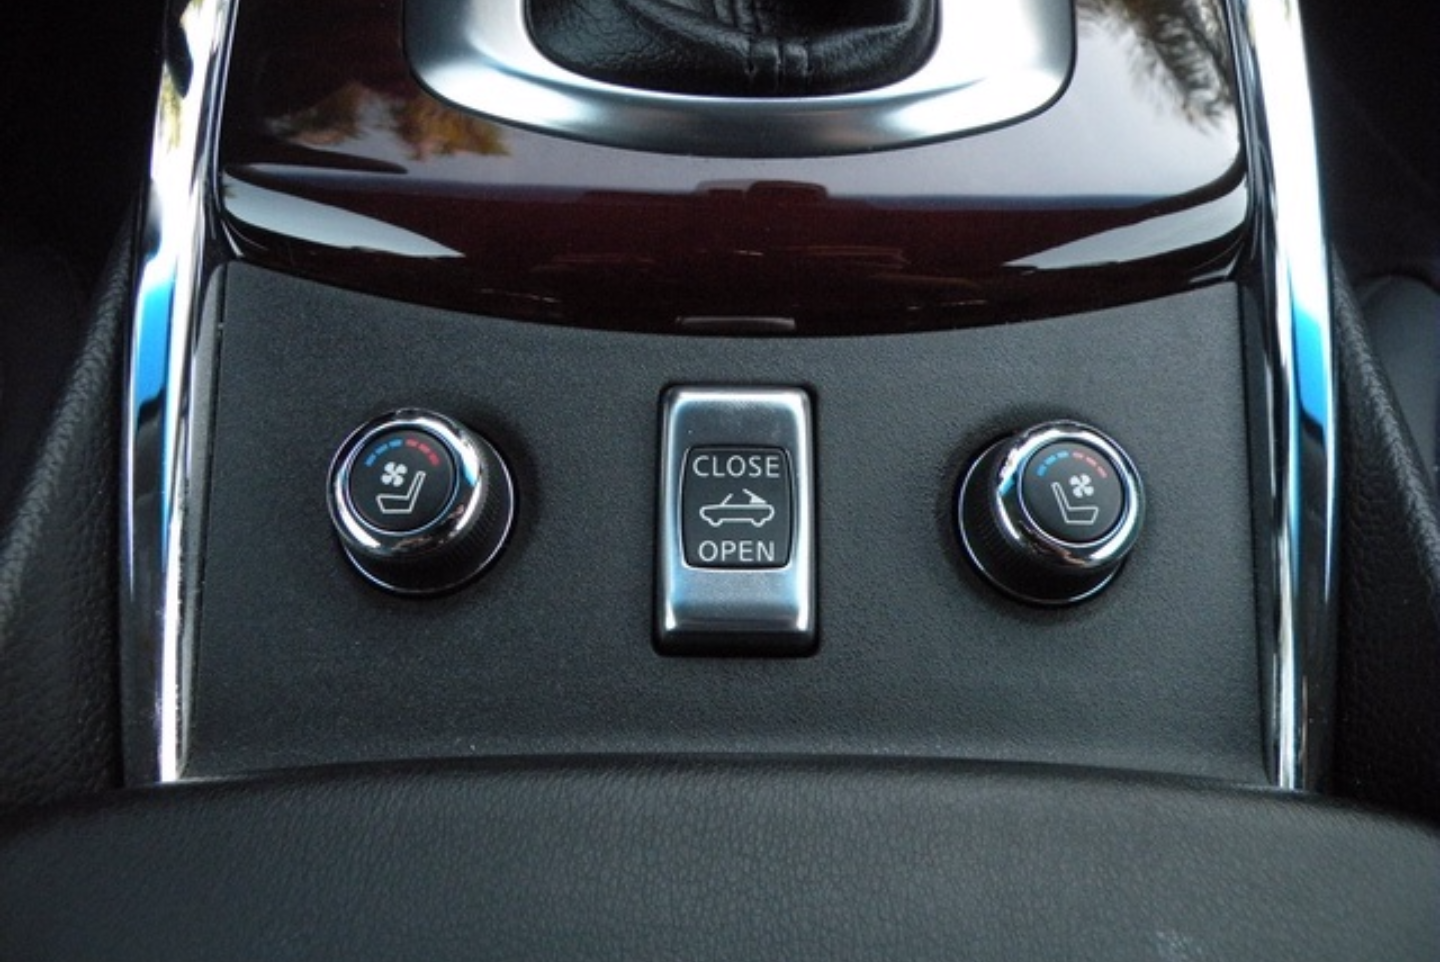 Why Is The Driver Side Heated Seat NOT Working? - Troubleshooting Tips & Potential Solutions